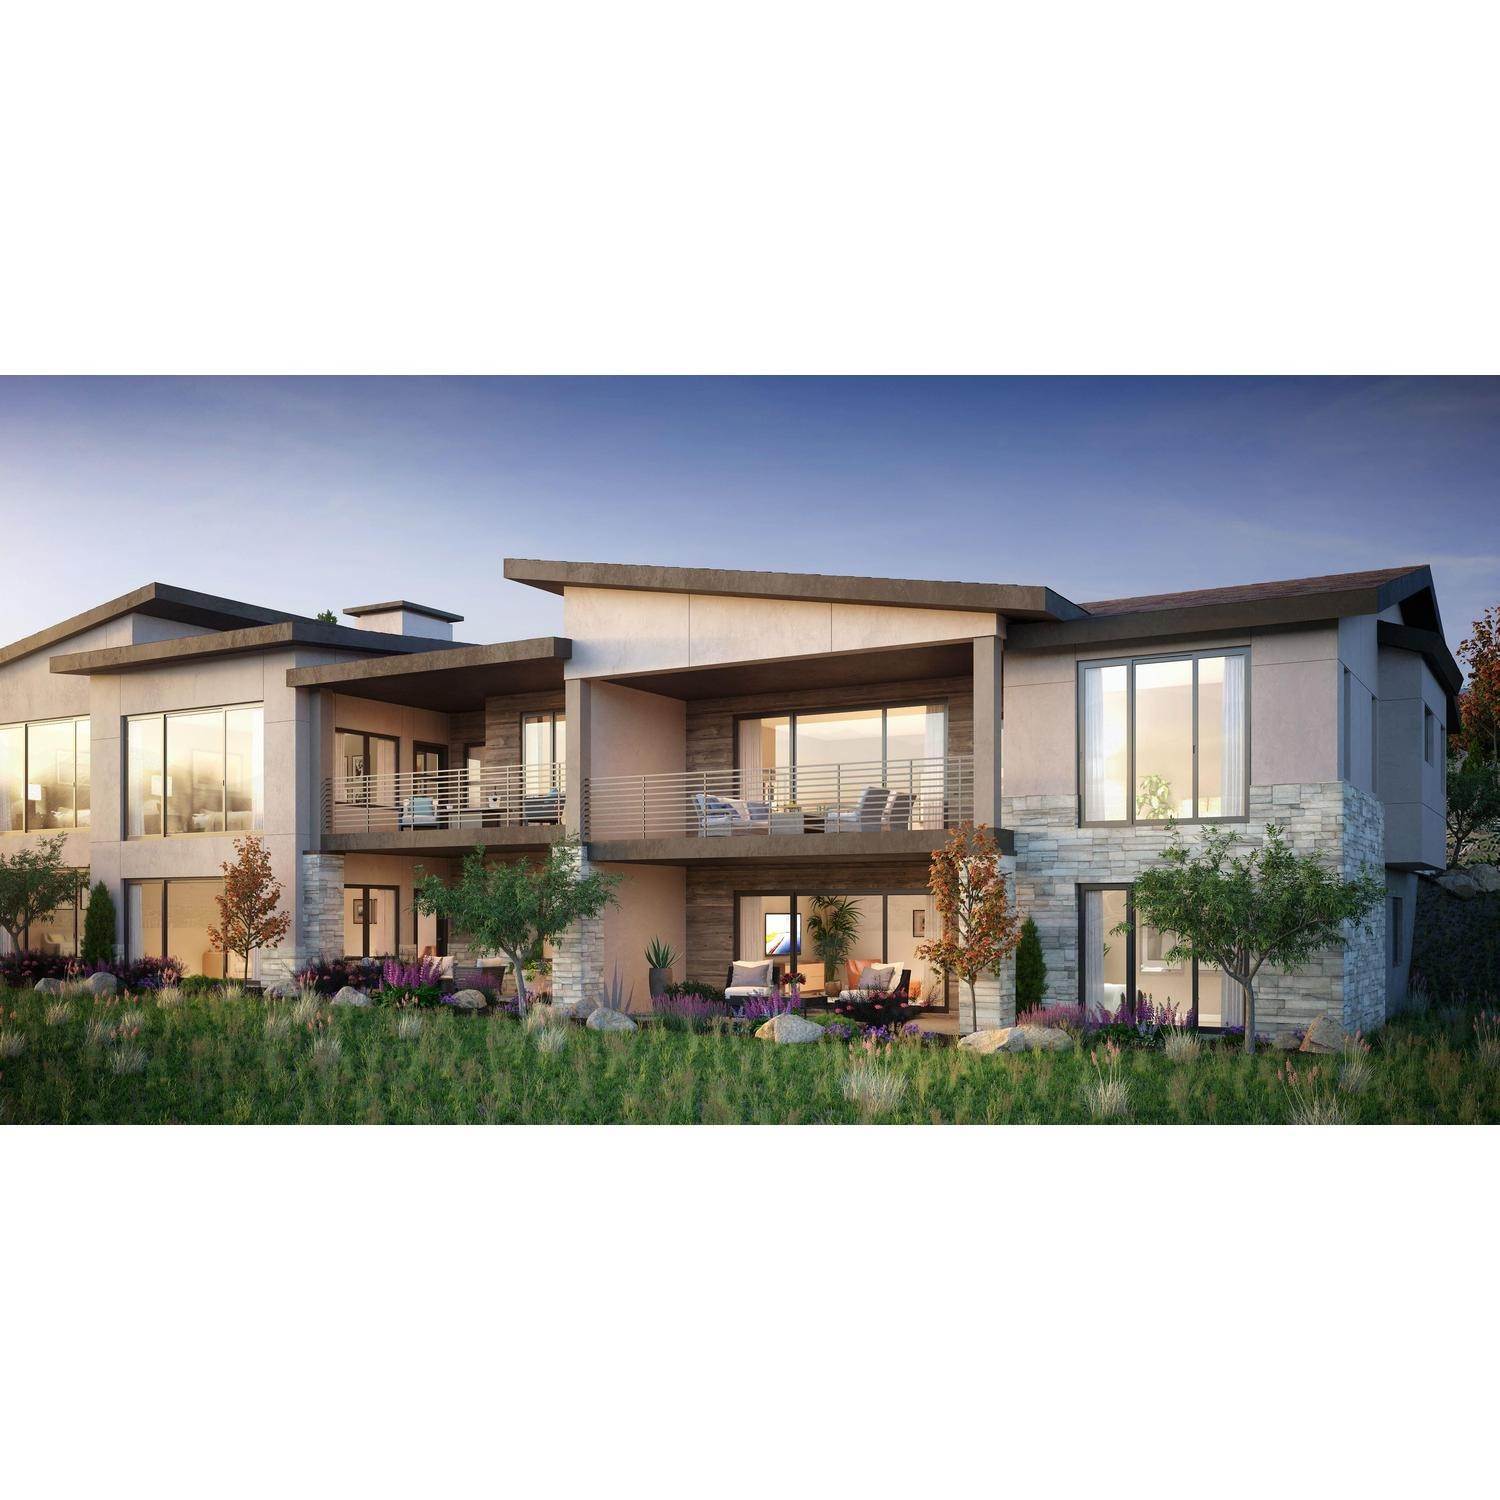 16. Shoreline Townhomes xây dựng tại 11449 N. Perspective Drive, Hideout Canyon, UT 84036